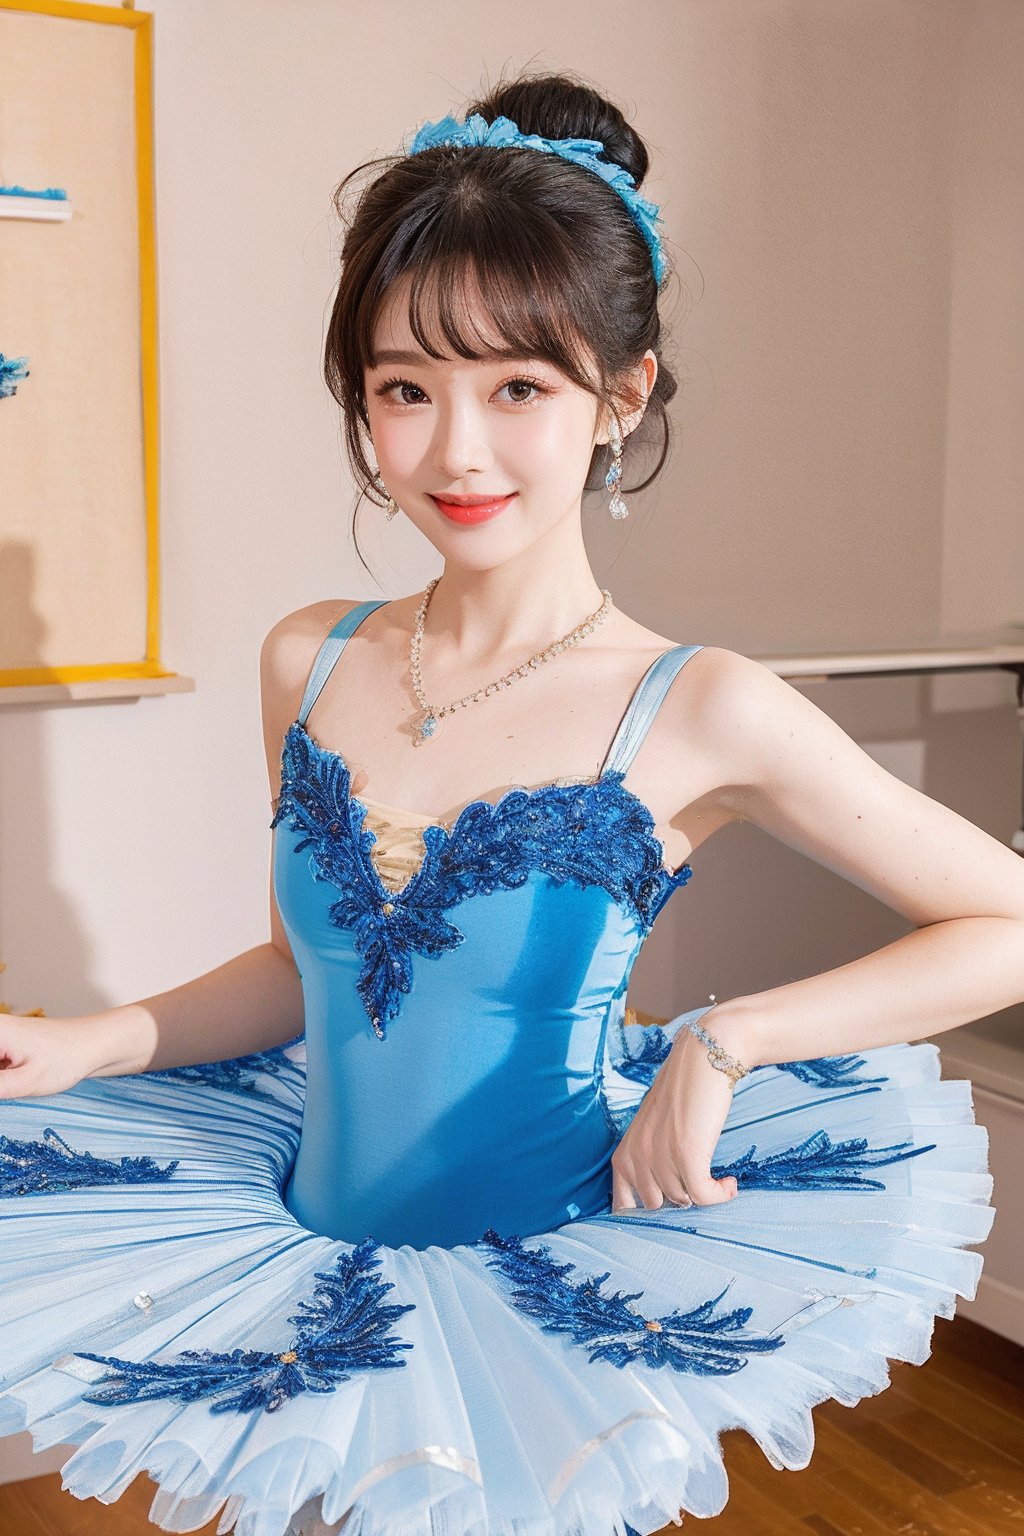 HDR,UHD,8K,best quality,masterpiece,Highly detailed,Studio lighting,ultra-fine painting,sharp focus,physically-based rendering,extreme detail description,Professional,masterpiece, best quality,delicate, beautiful,(1girl),(blue Ballet_tutu:1.5),(jewelry:1.5),lace,(looking_at_viewer:1.2), realistic,(blunt bangs:1.2),(hair bun),(standing:1),(hair ornament:1.2), (jewelry necklace:1),dance classroom background,(Half-length photo:1),(smile:1),(white lace stockings:1),